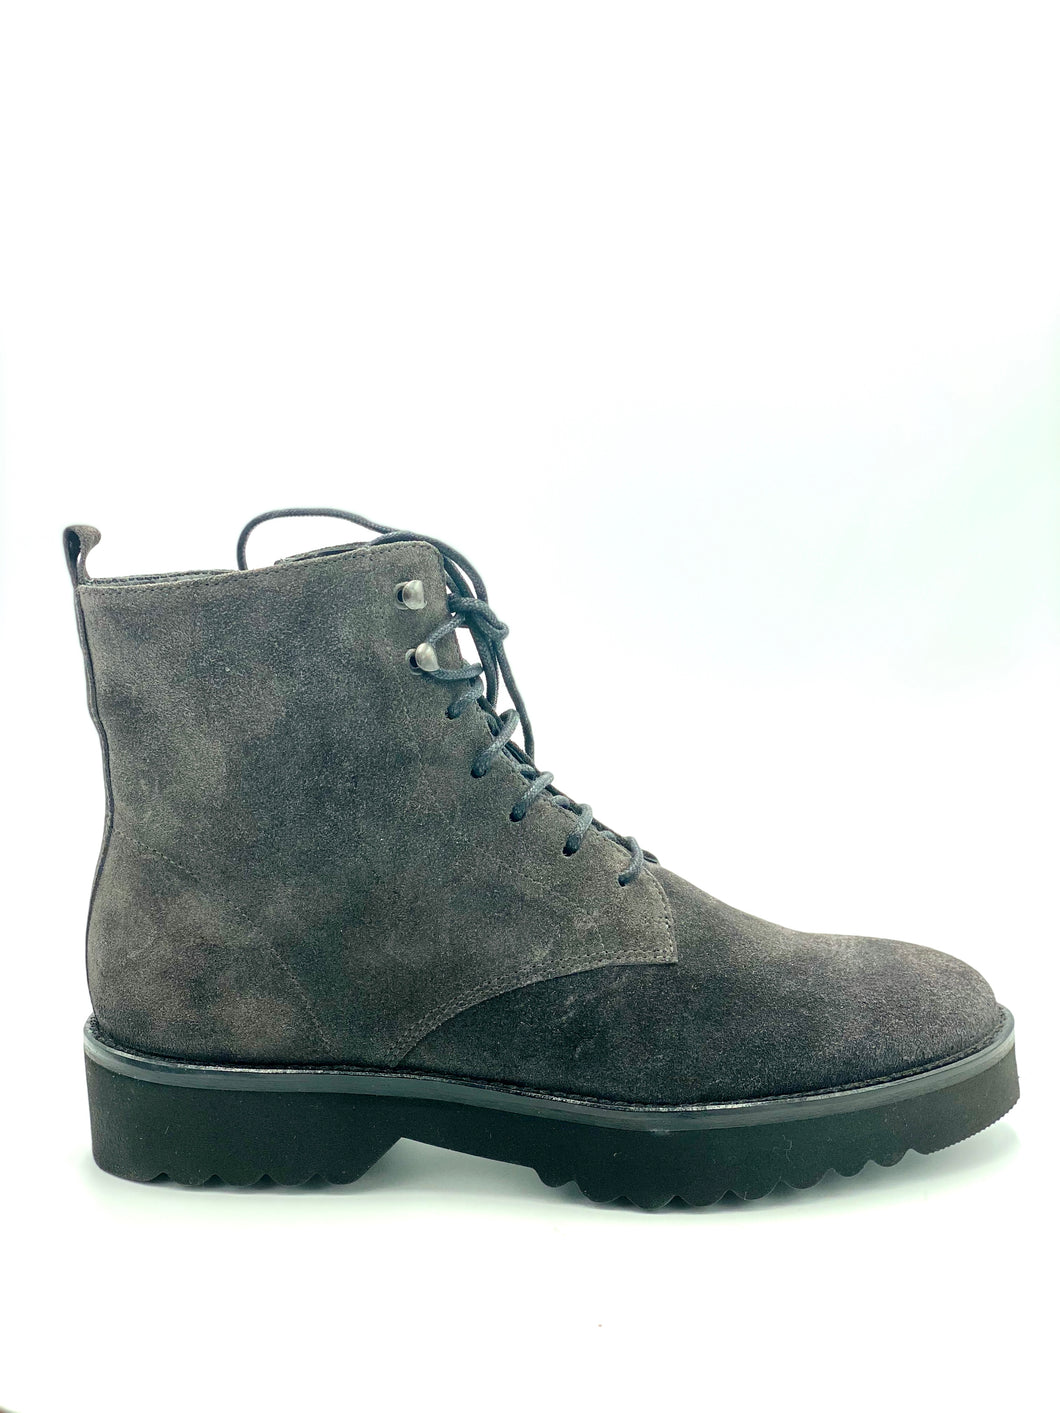 Homers King lace up ankle boot in grey suede.